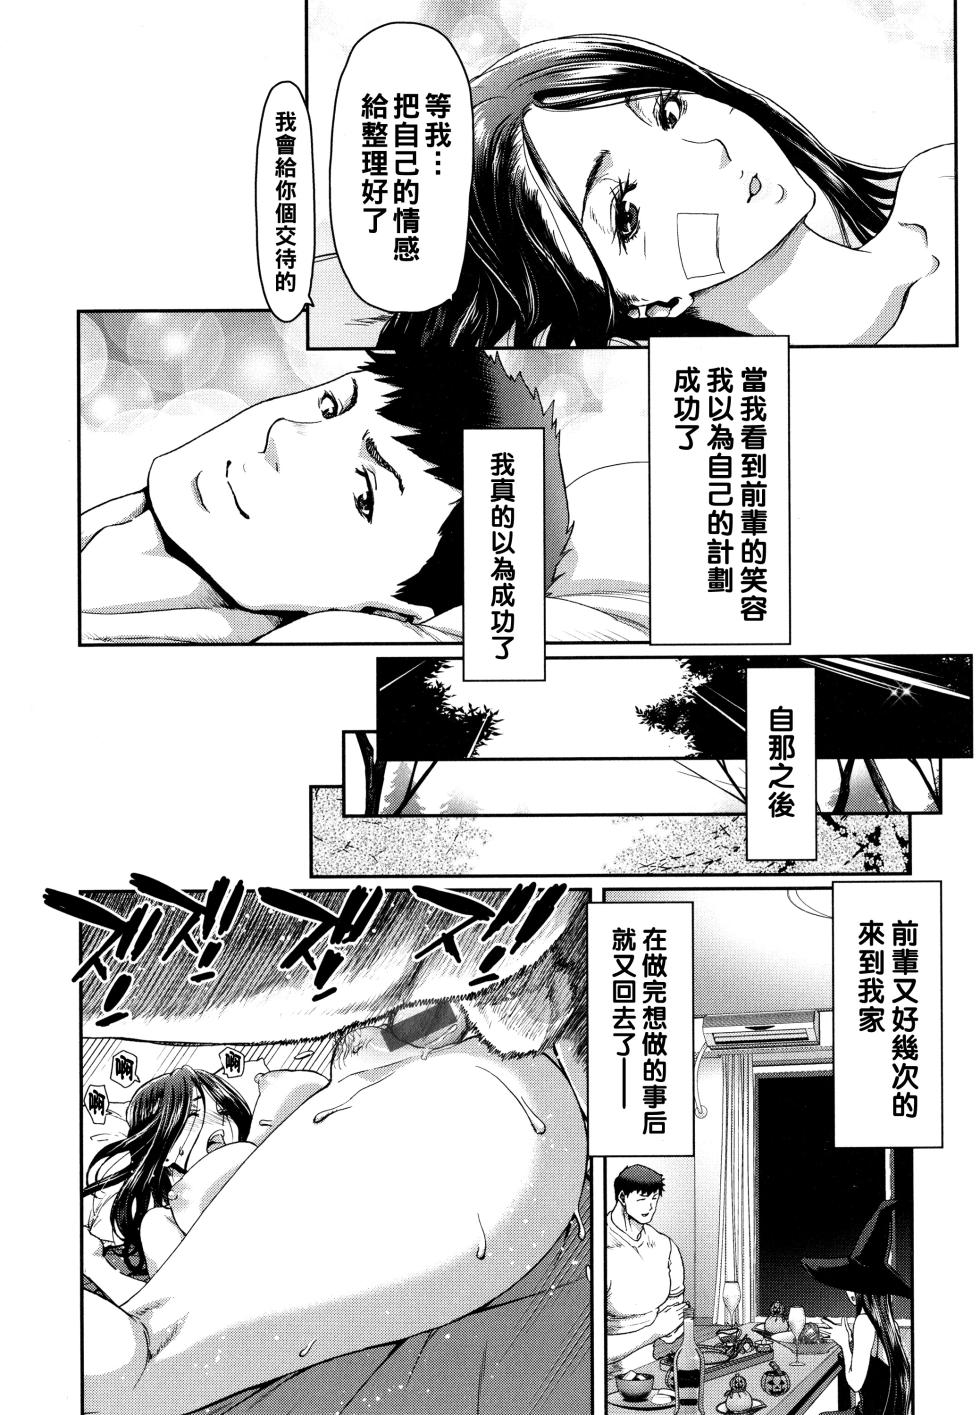 [Hori Hiroaki] Iede Onna o Hirottara - When I picked up a runaway girl. [Chinese] [Ongoing] - Page 17